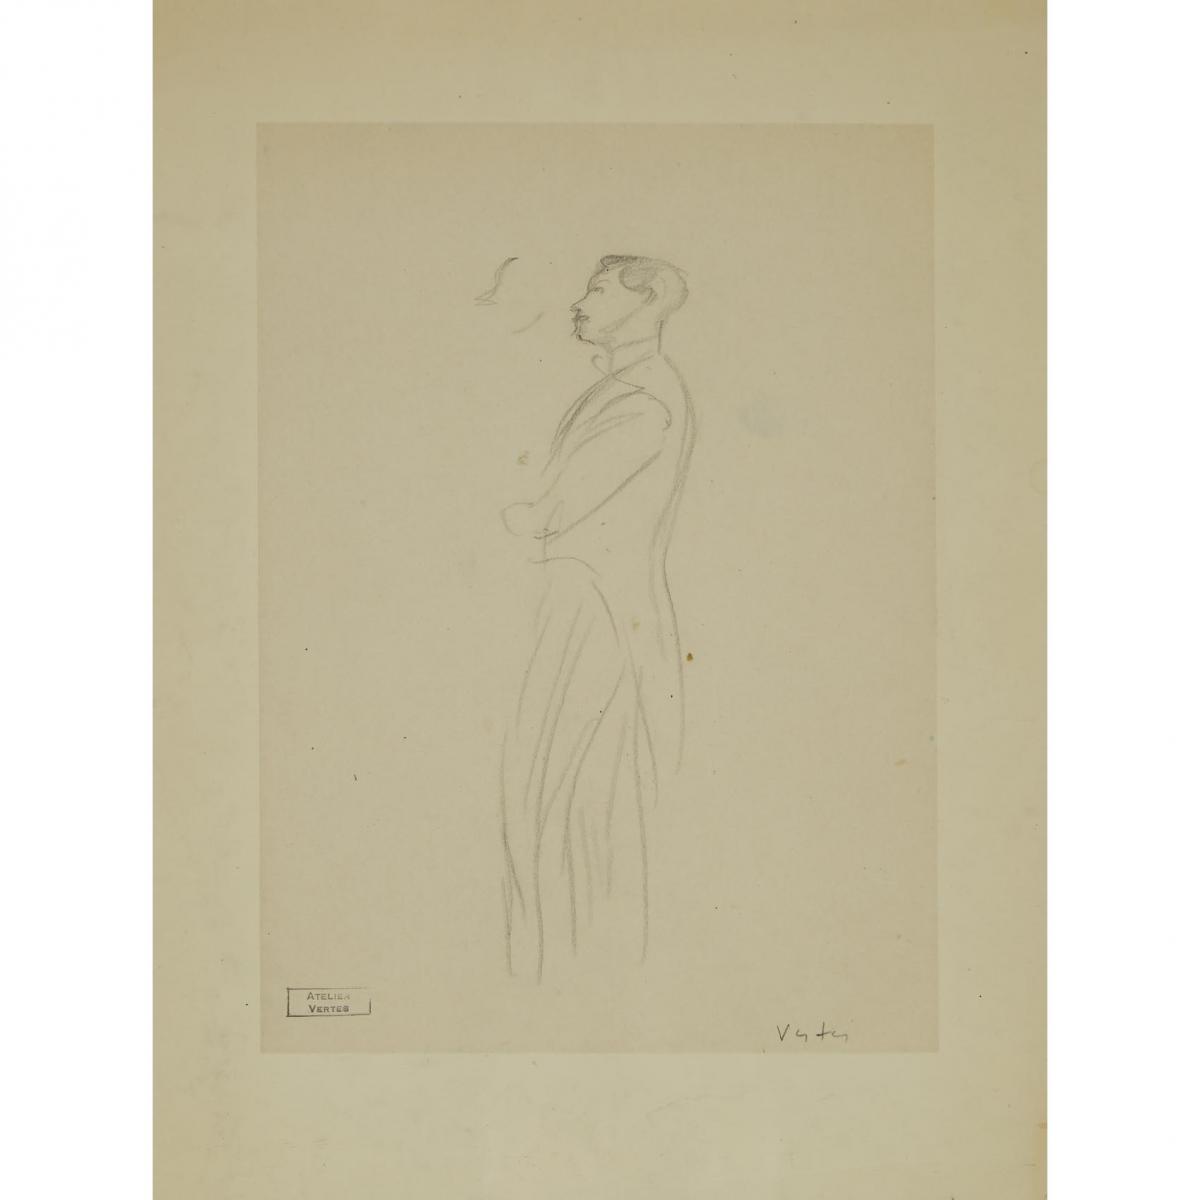 Various Artists, COLLECTION OF DRAWINGS, SOME 1956, Auguste François (Marie) Gorguet (1862-1927), Fr - Image 17 of 17